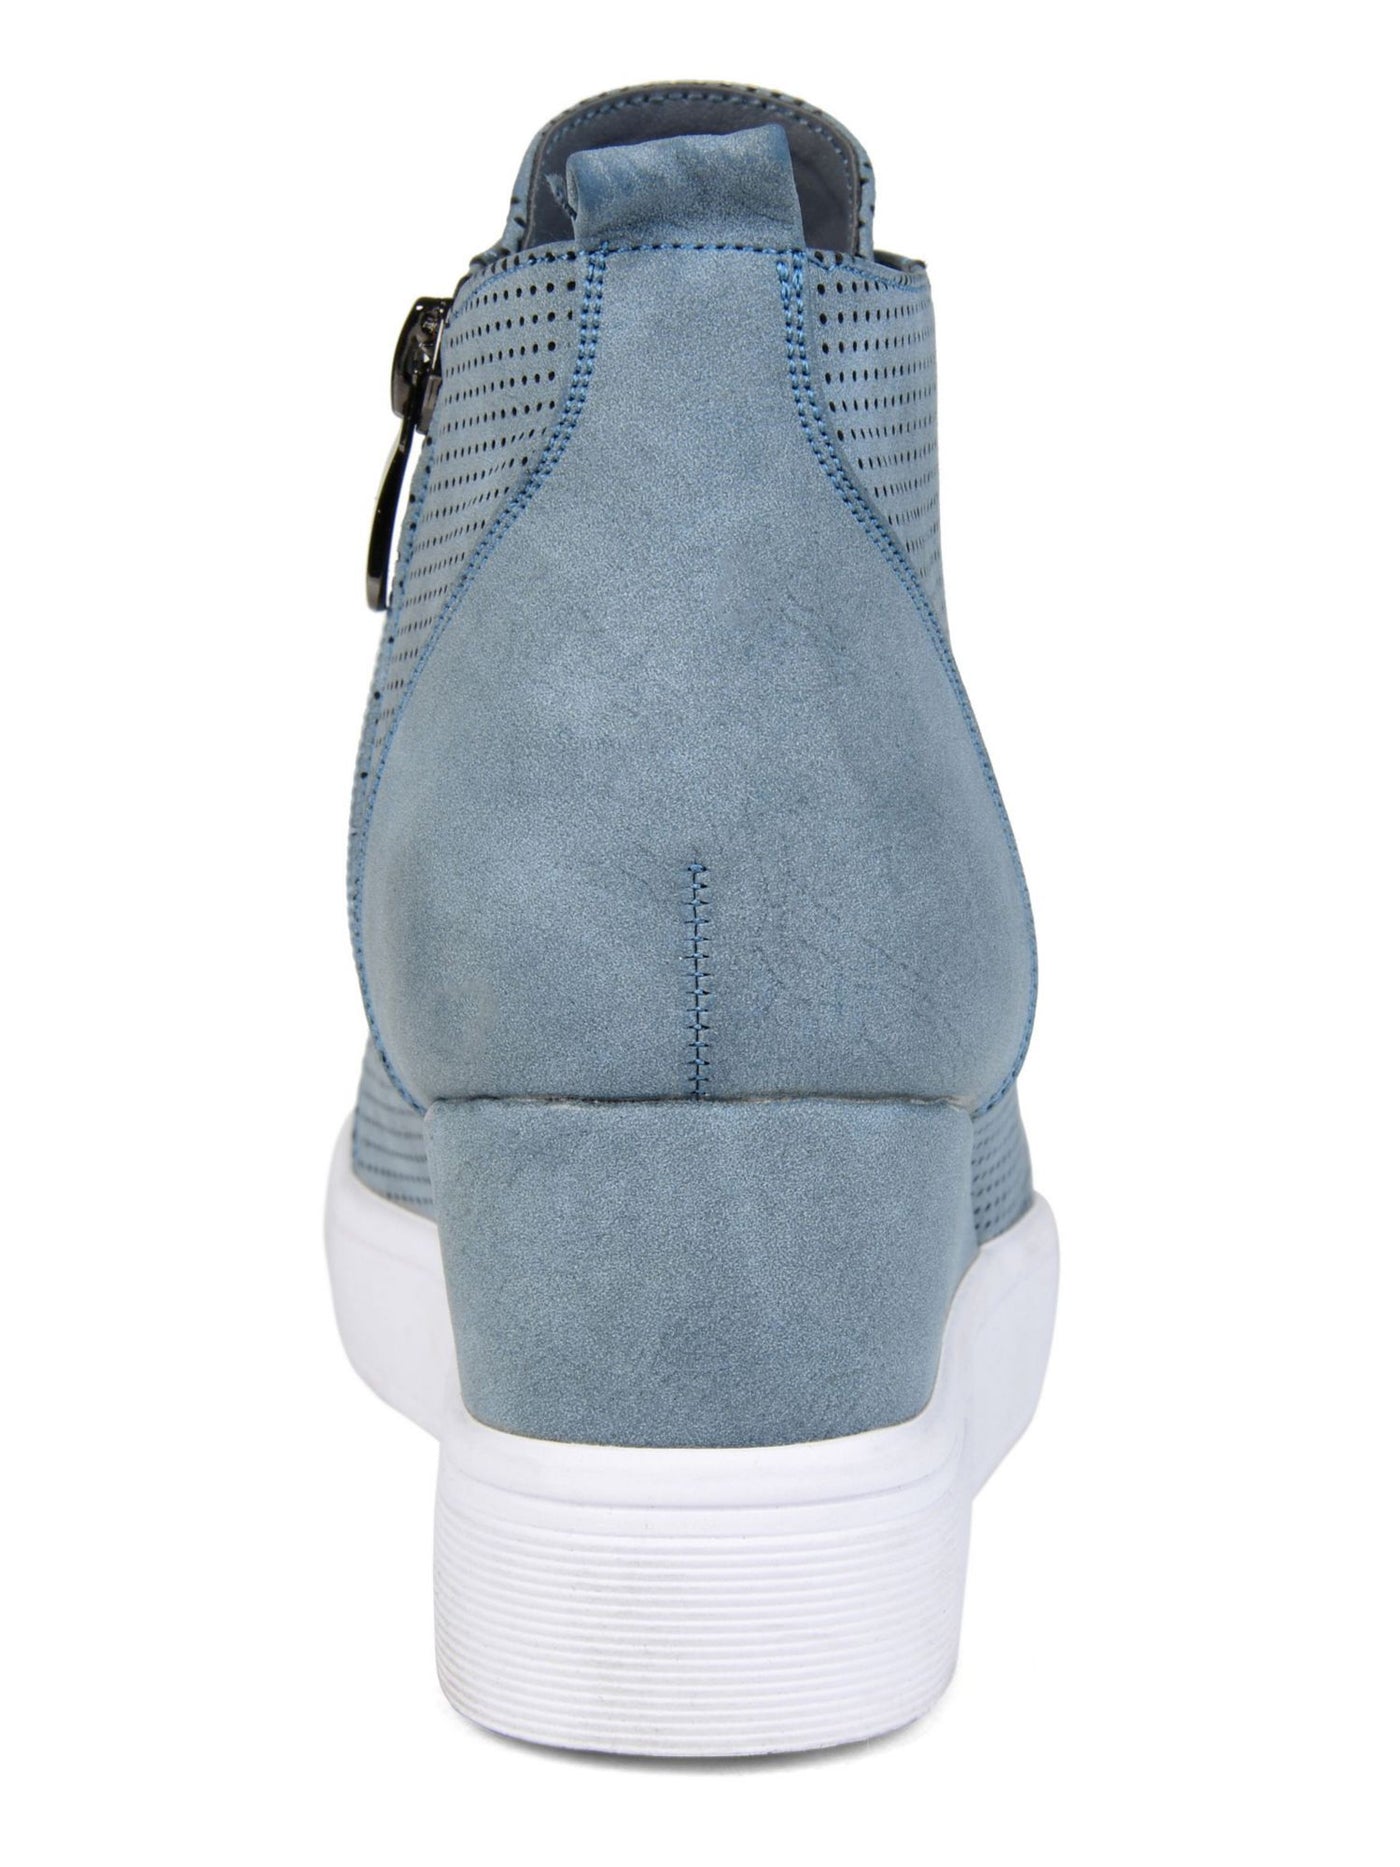 JOURNEE COLLECTION Womens Blue Pinhole Texture 1" Platform Clara Almond Toe Wedge Zip-Up Athletic Sneakers Shoes 11